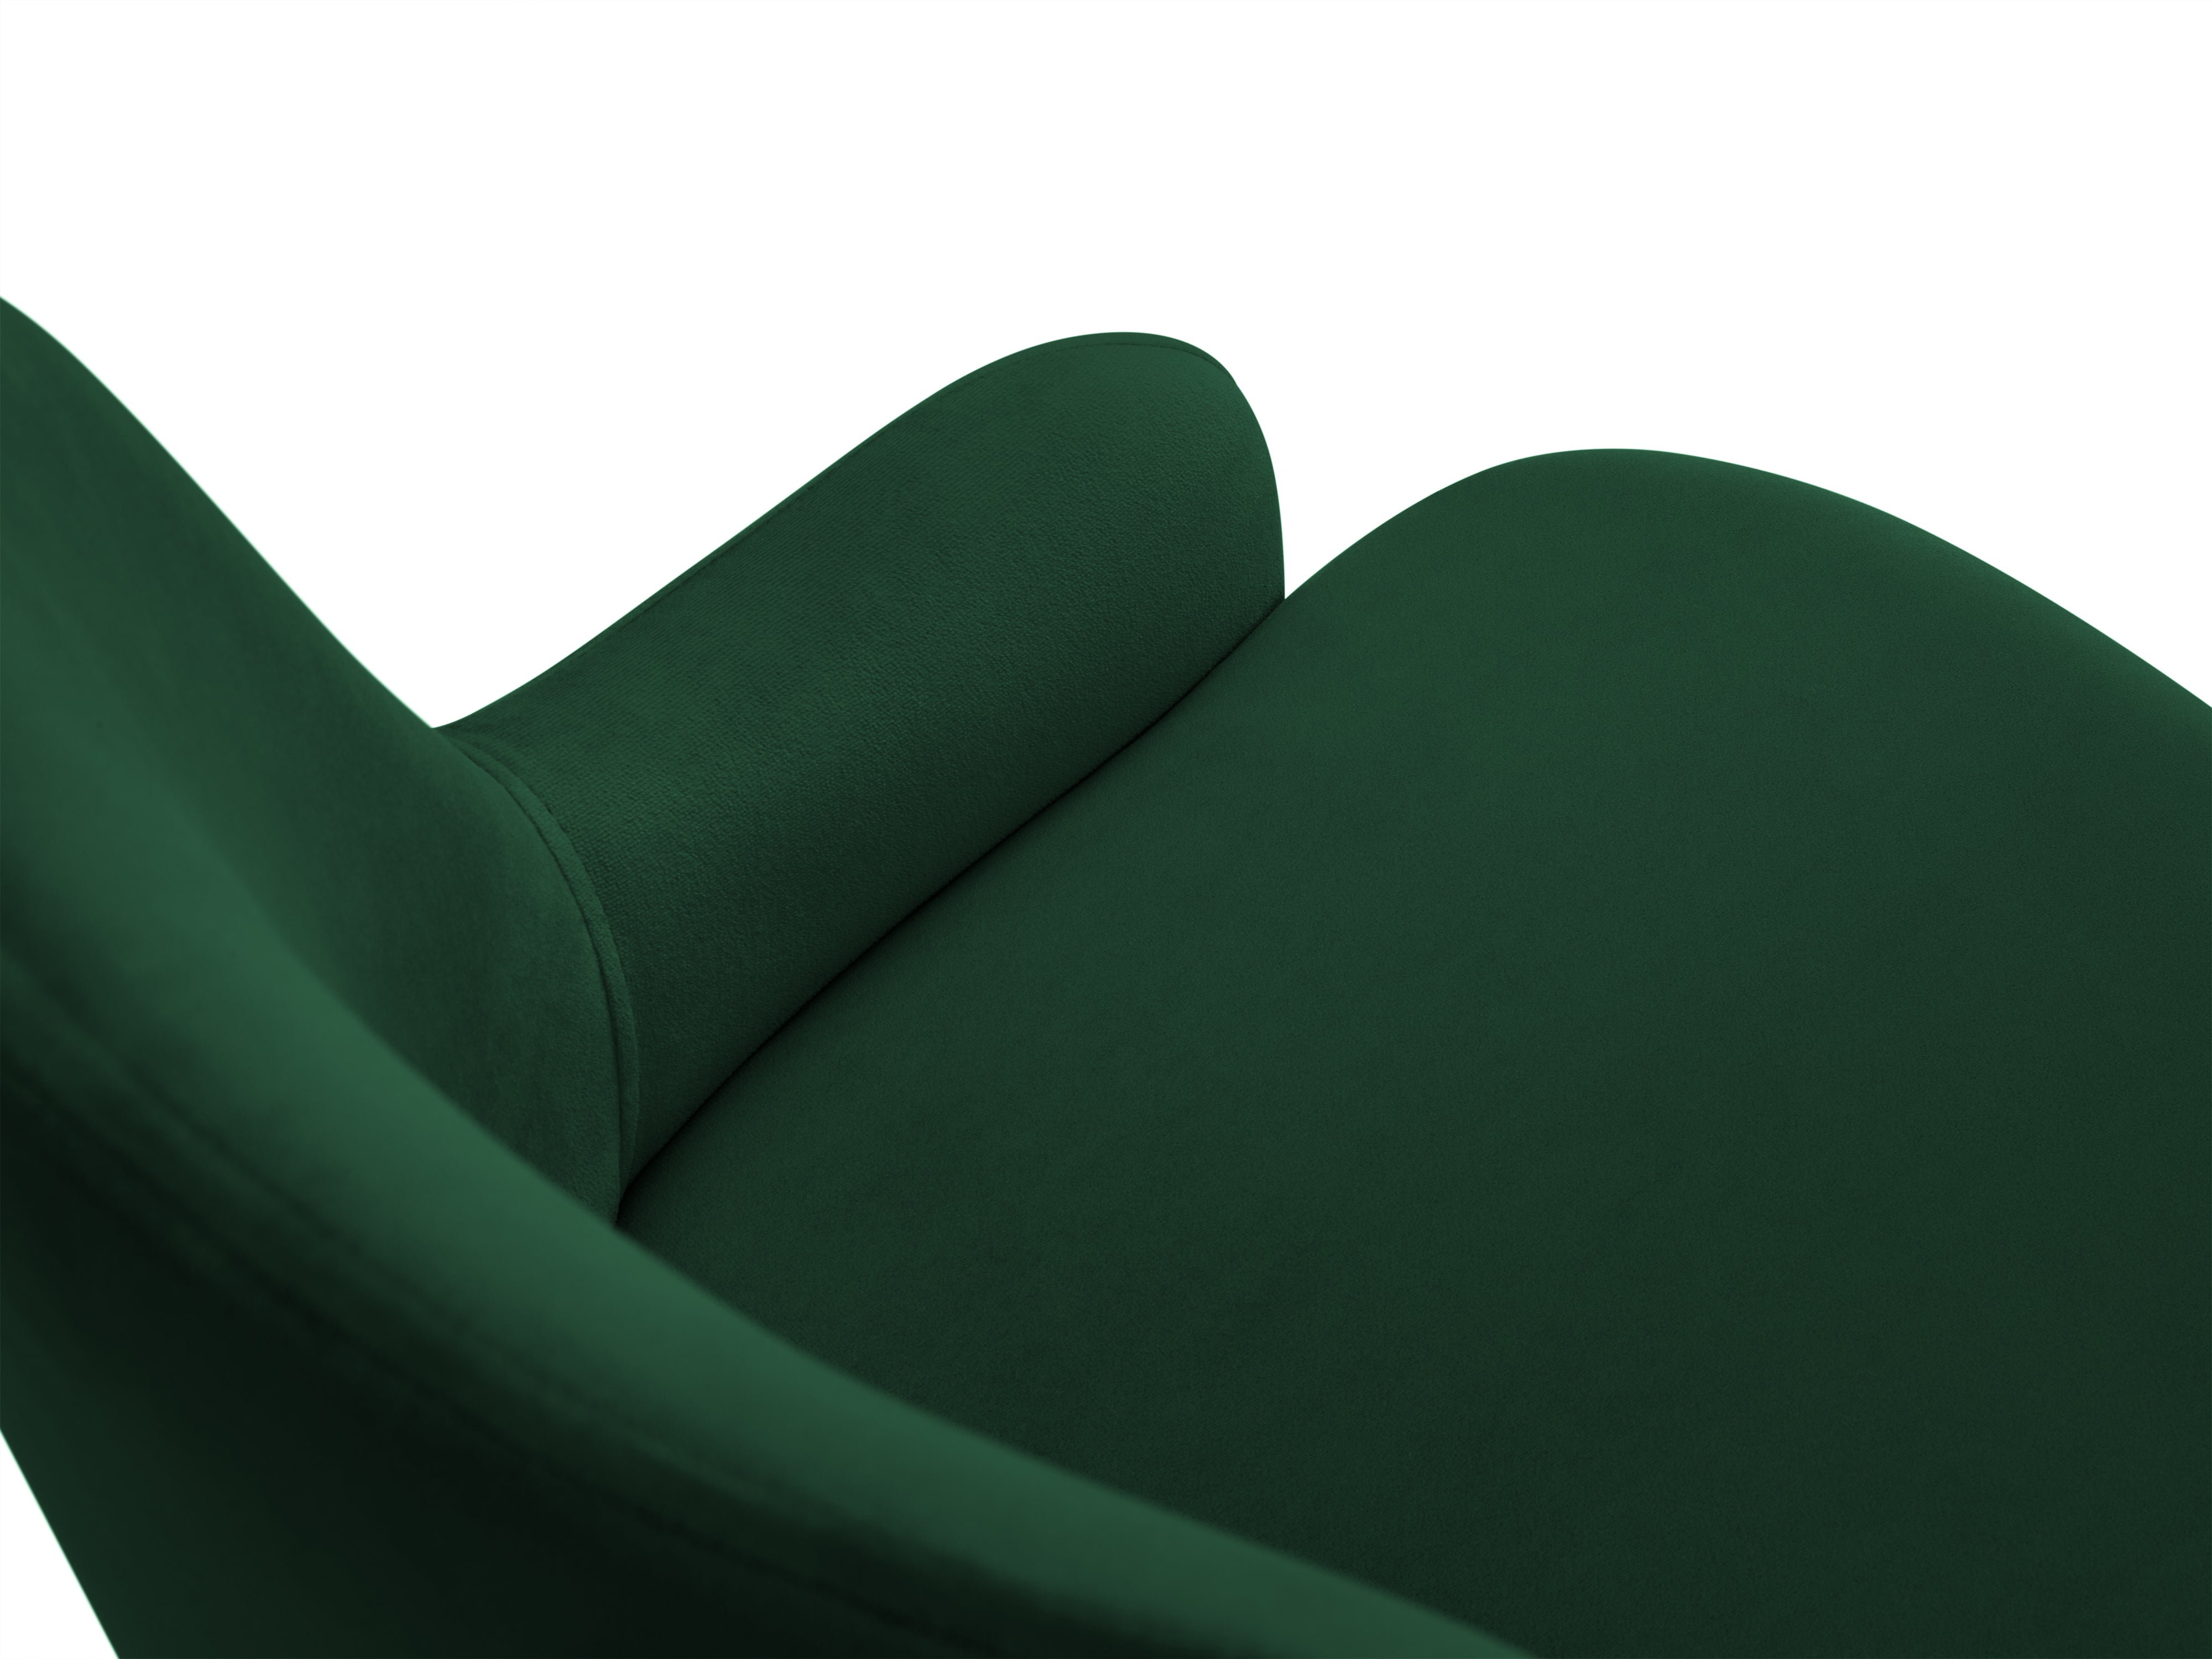 A chair with armrests bottled green